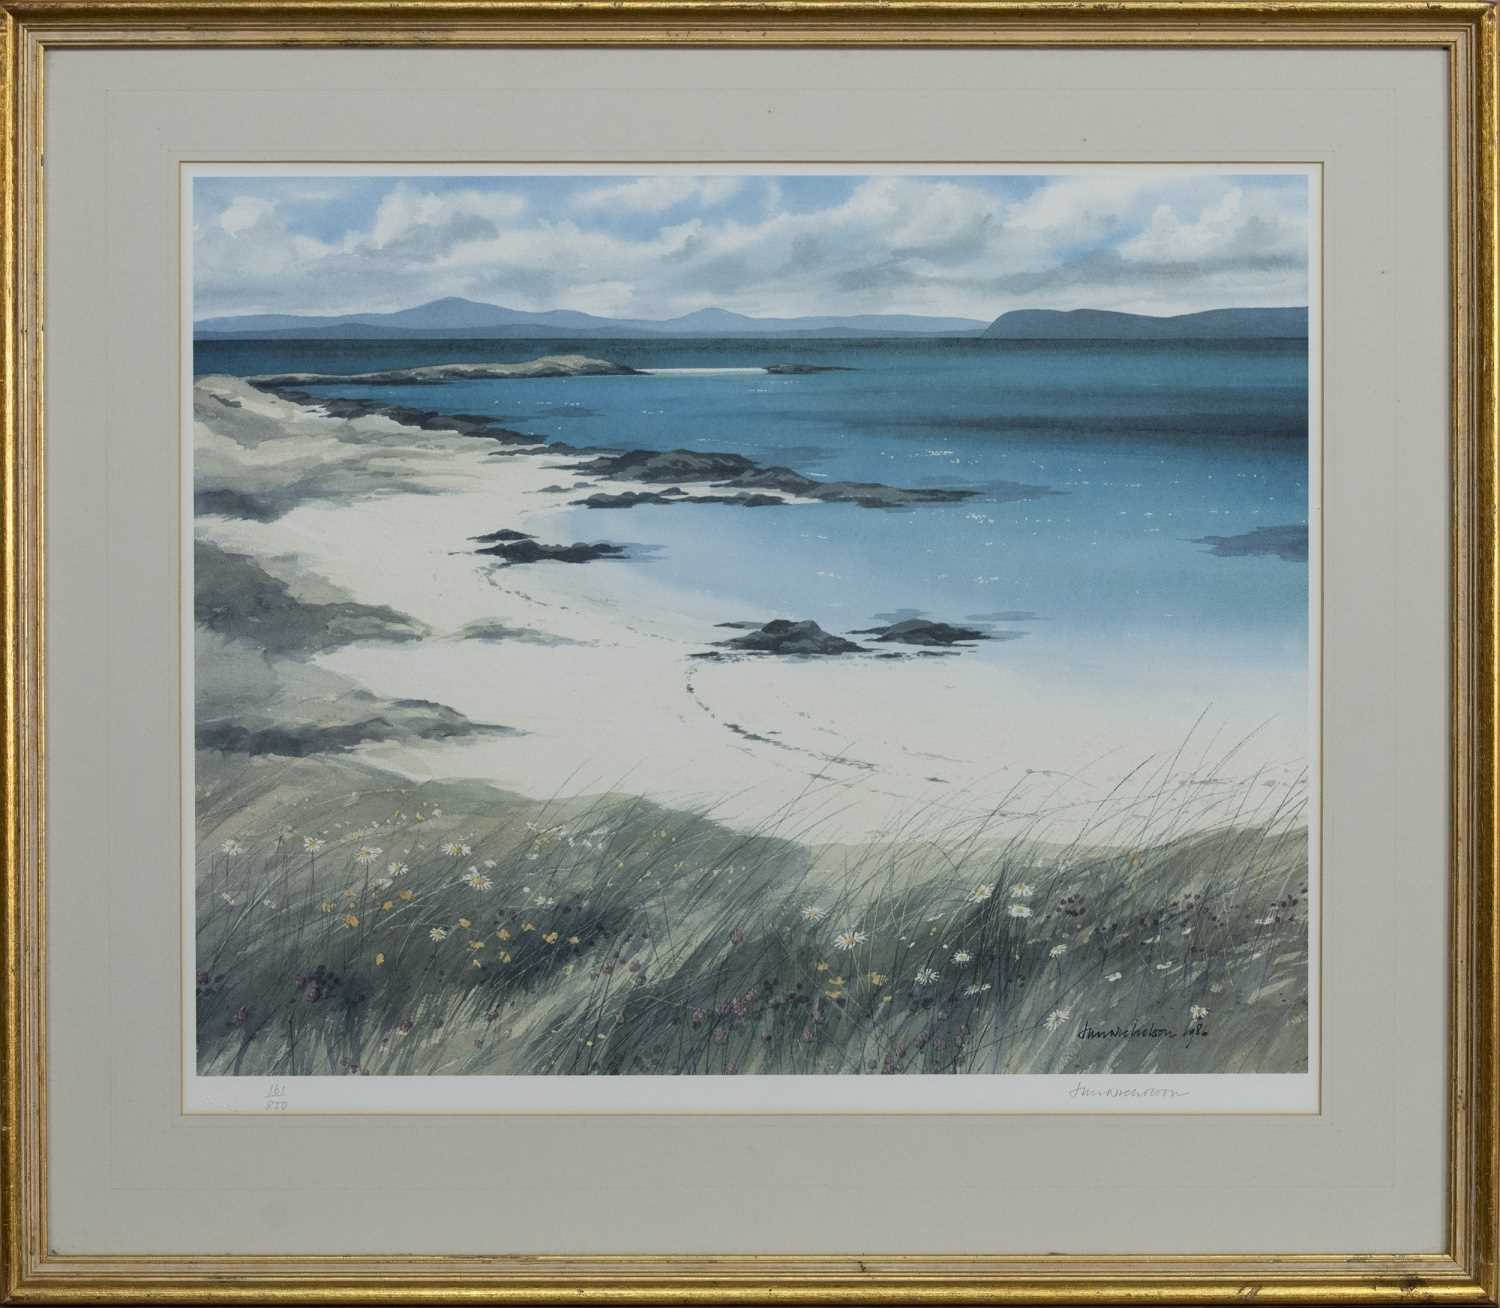 A VIEW TO THE ISLANDS, A SIGNED LIMITED EDITION PRINT BY JIM NICHOLSON